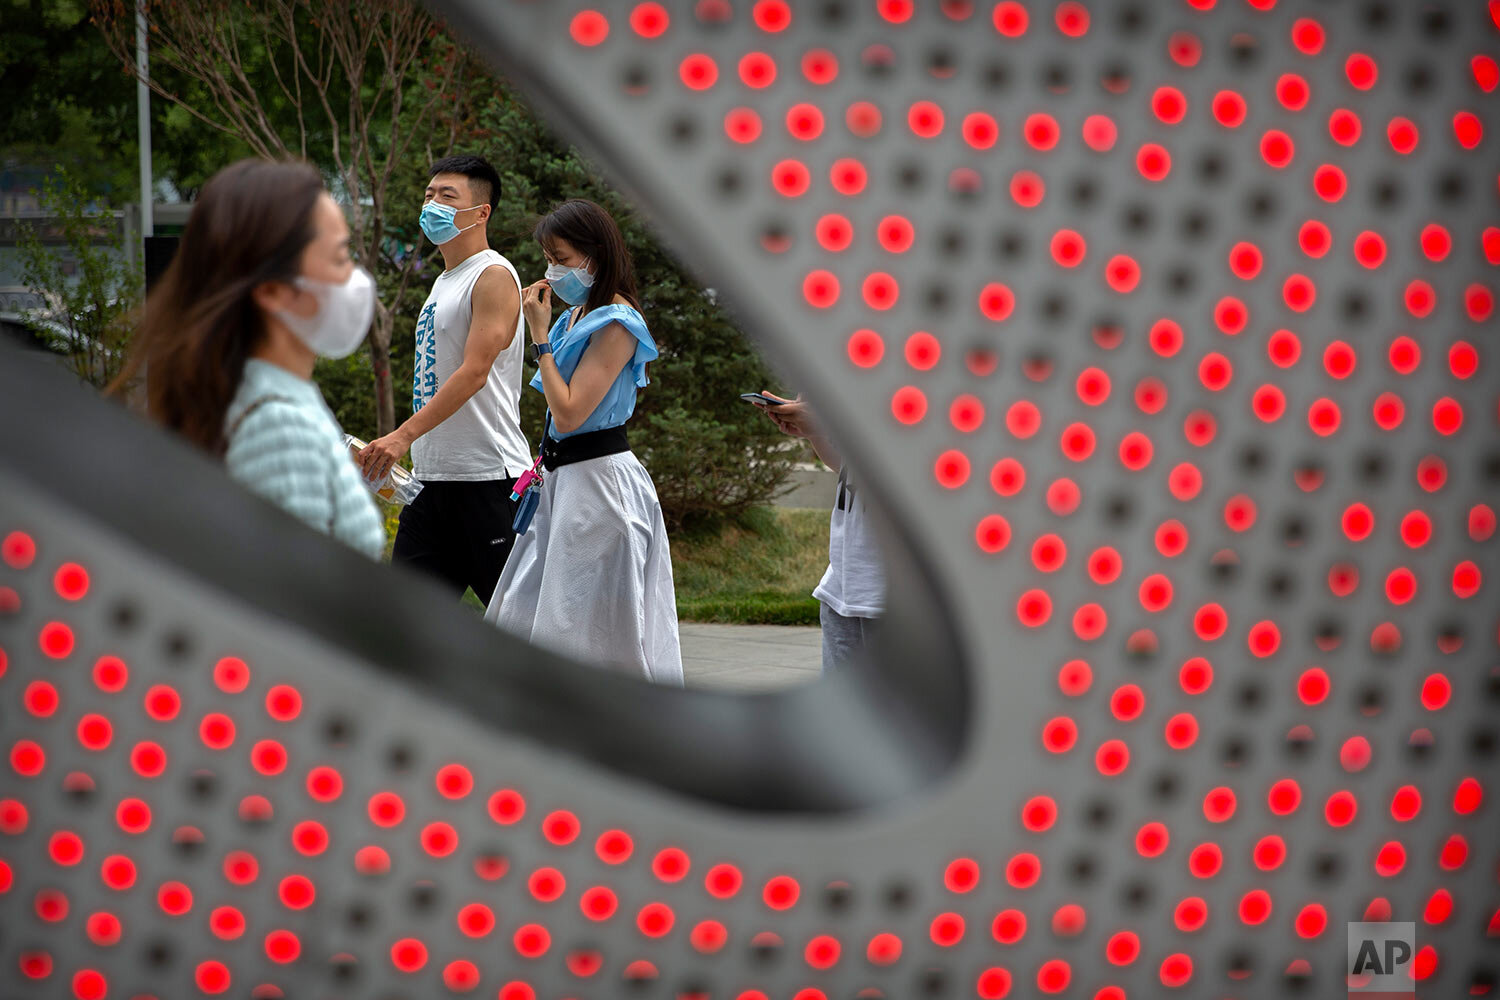  People wearing face masks to protect against the spread of the new coronavirus walk through a shopping and office complex in Beijing, Wednesday, June 24, 2020. (AP Photo/Mark Schiefelbein) 